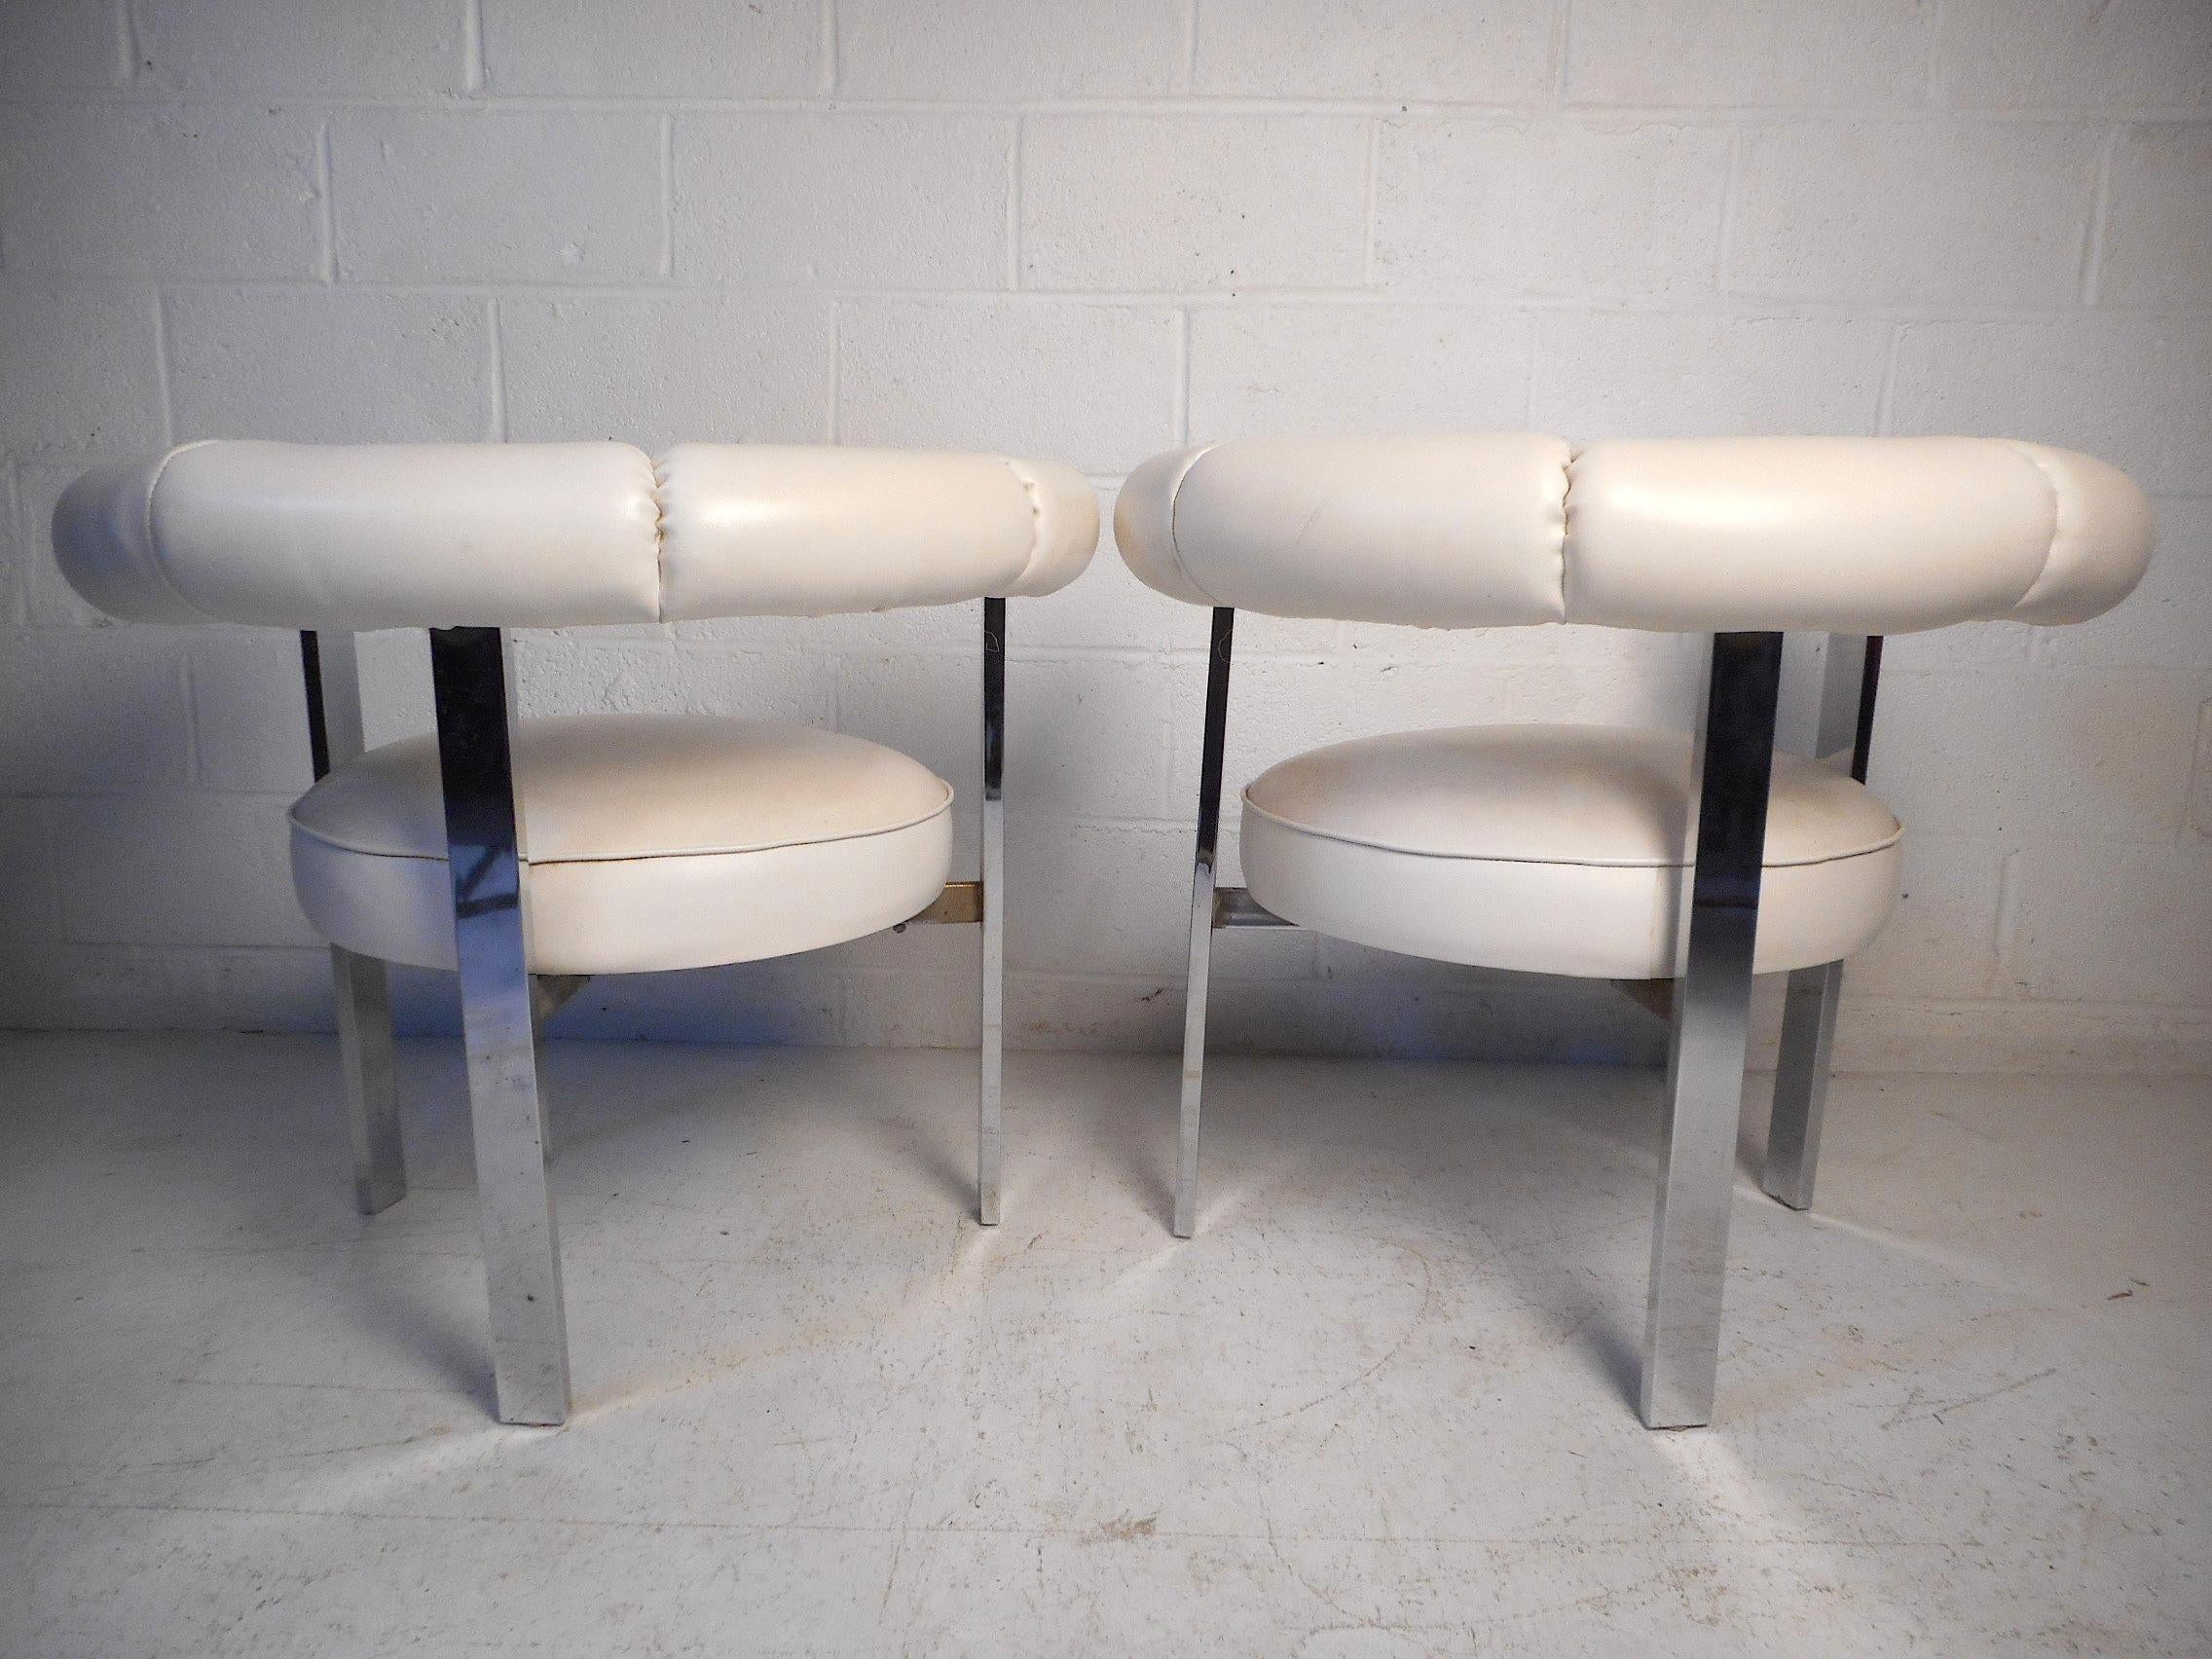 Faux Leather Pair of Midcentury Faux-Leather and Chrome Barrel-Back Chairs For Sale